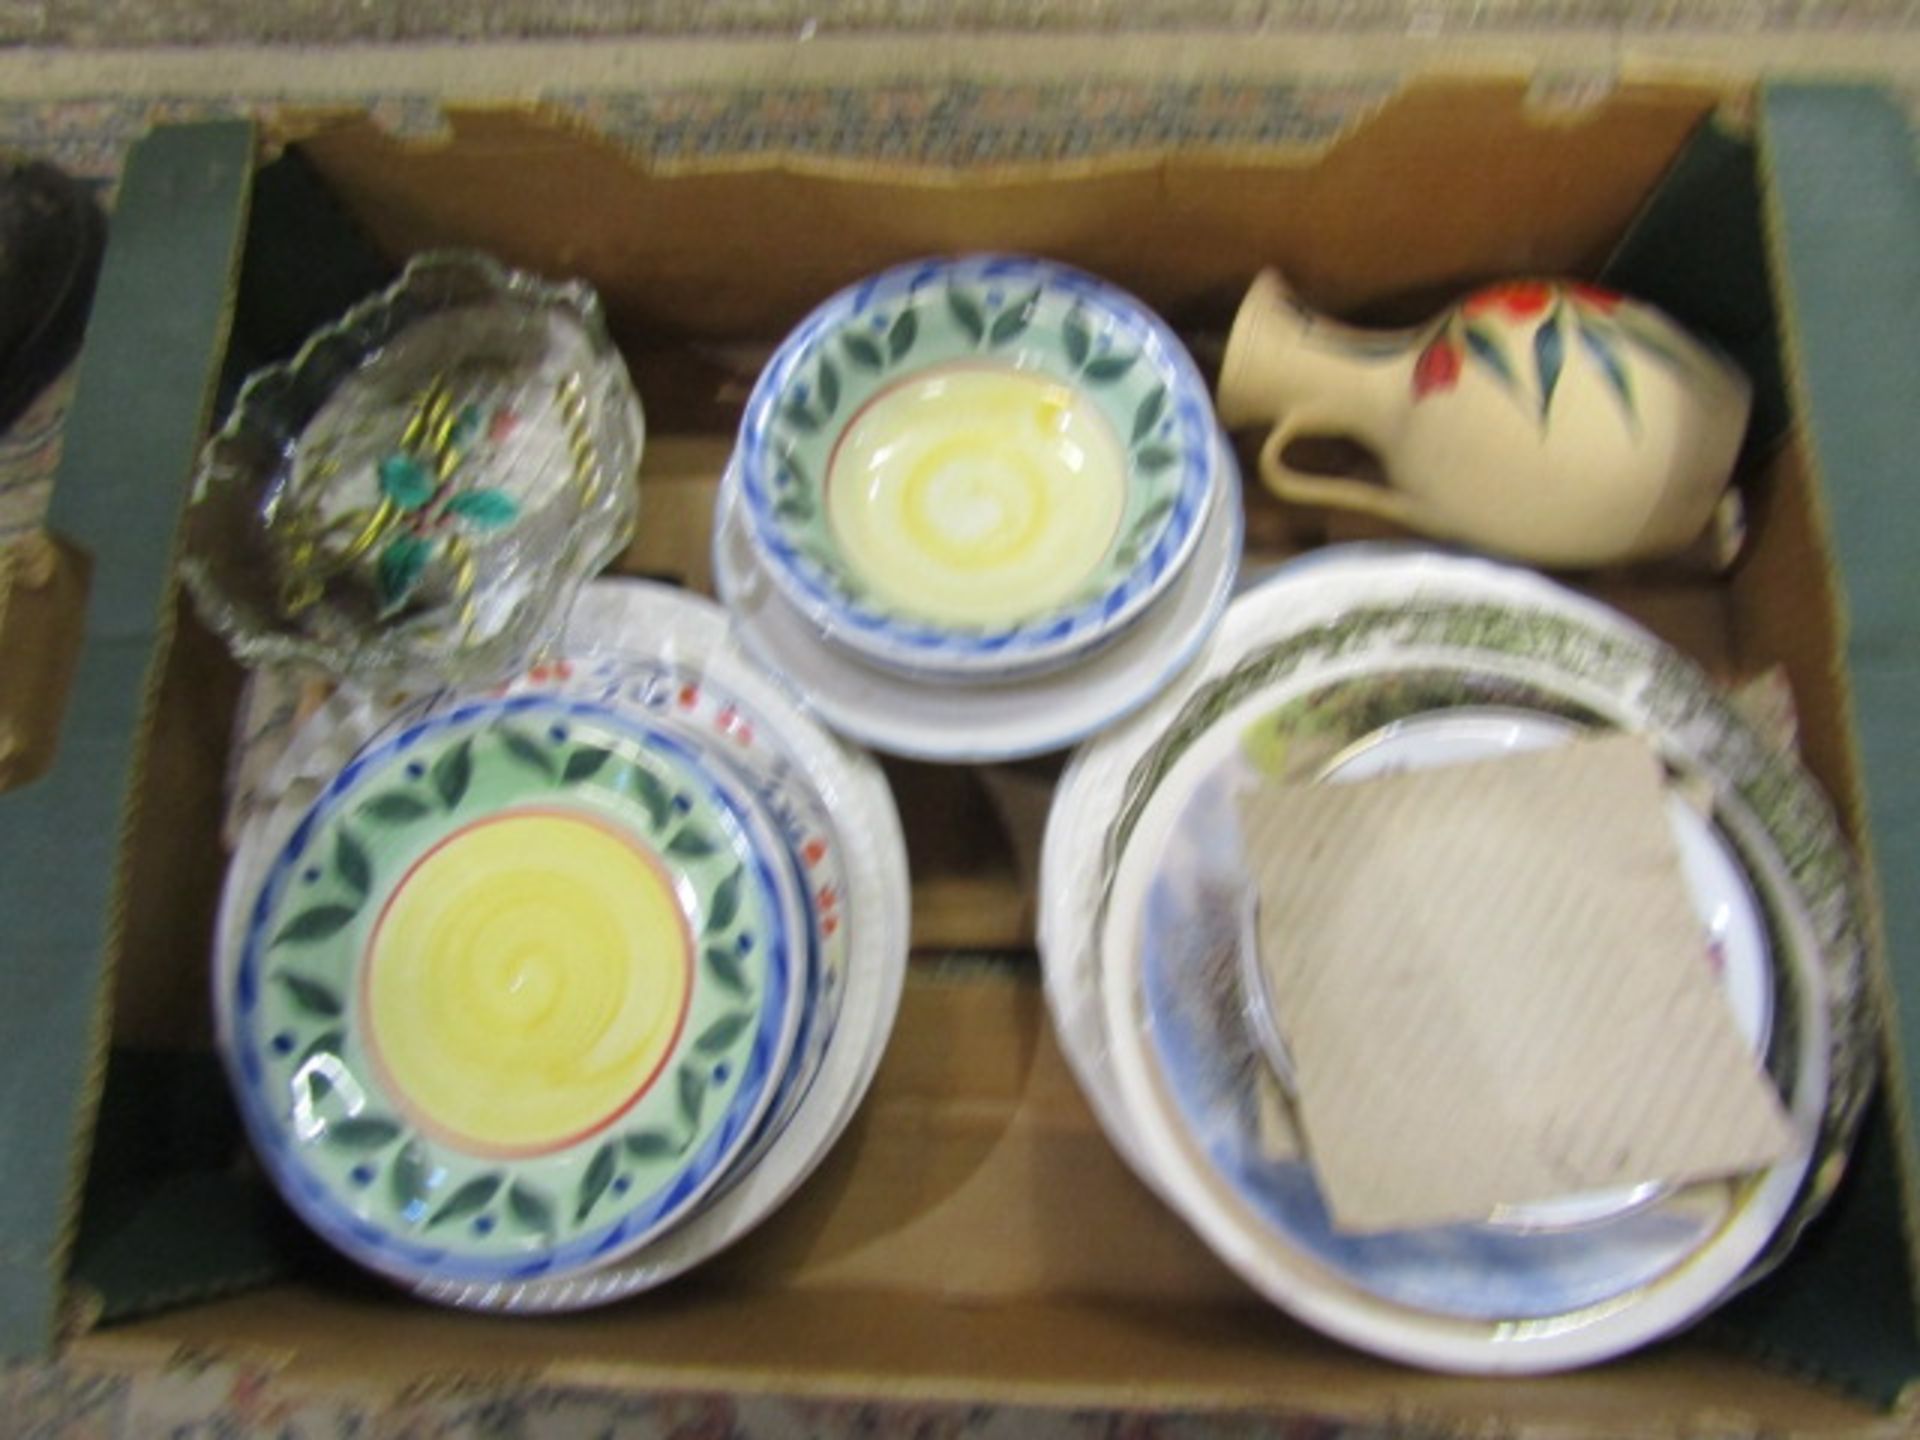 A stillage of china, glass and sundry items Stillage not included and all items must be removed - Image 8 of 15